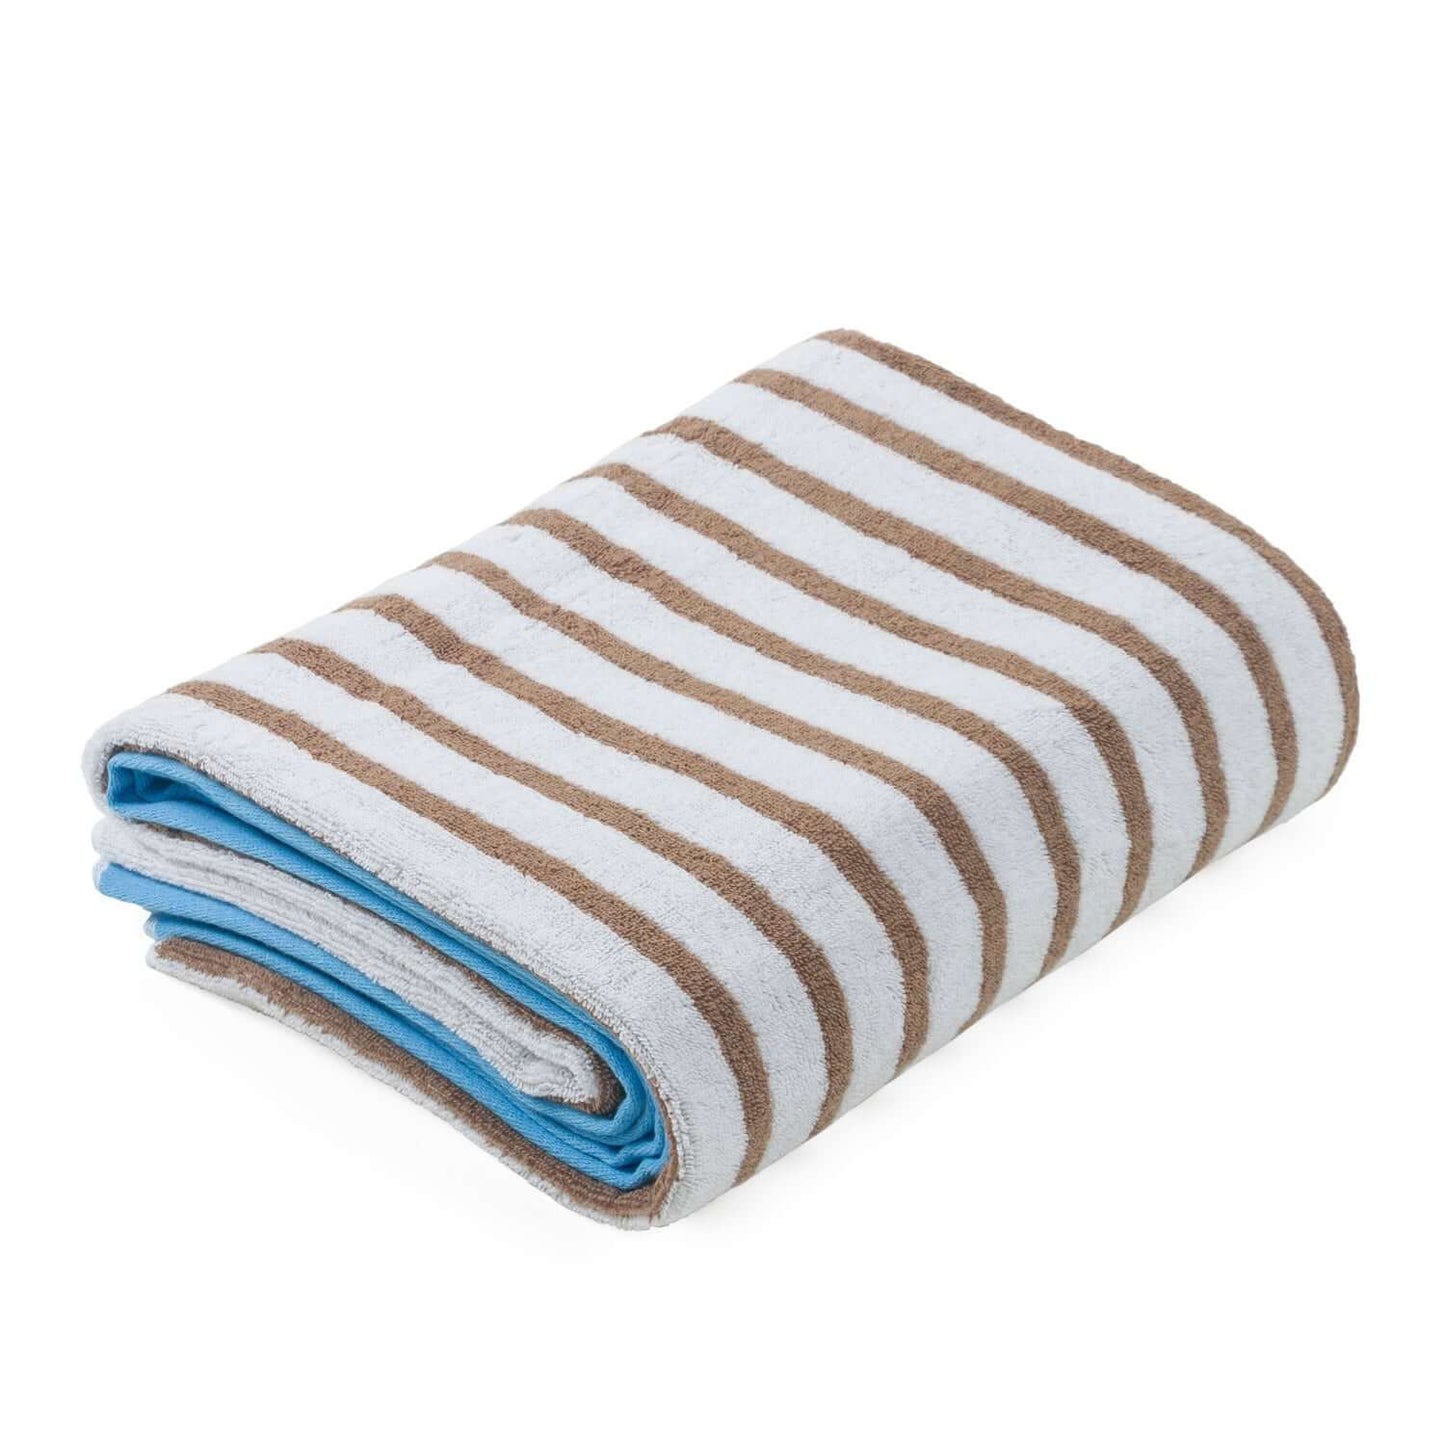 Linear Combed Cotton Towels